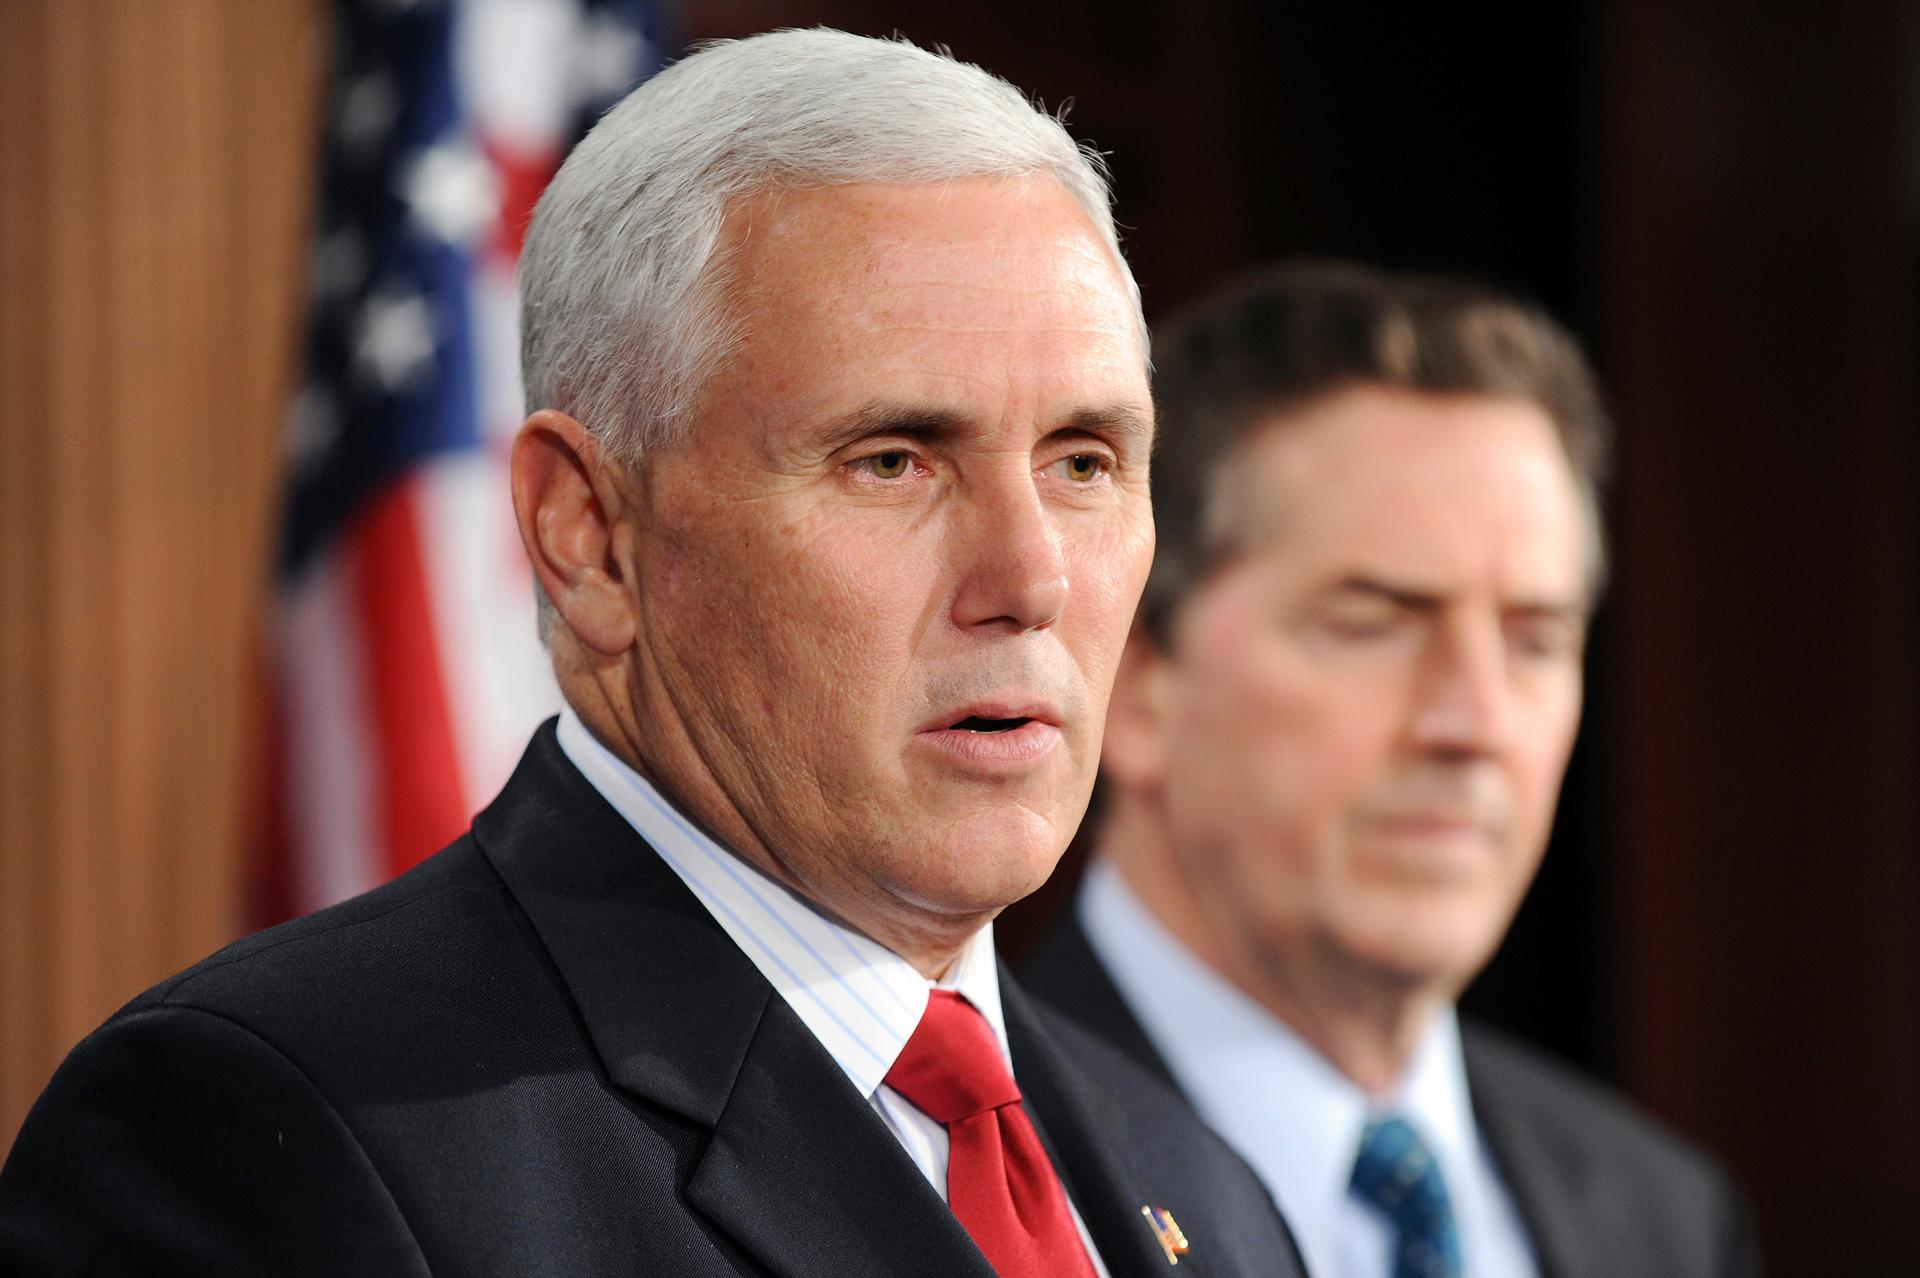 Indiana governor Mike Pence speak to reporters during a news conference at the U.S. Capitol in Washington December 2, 2010.